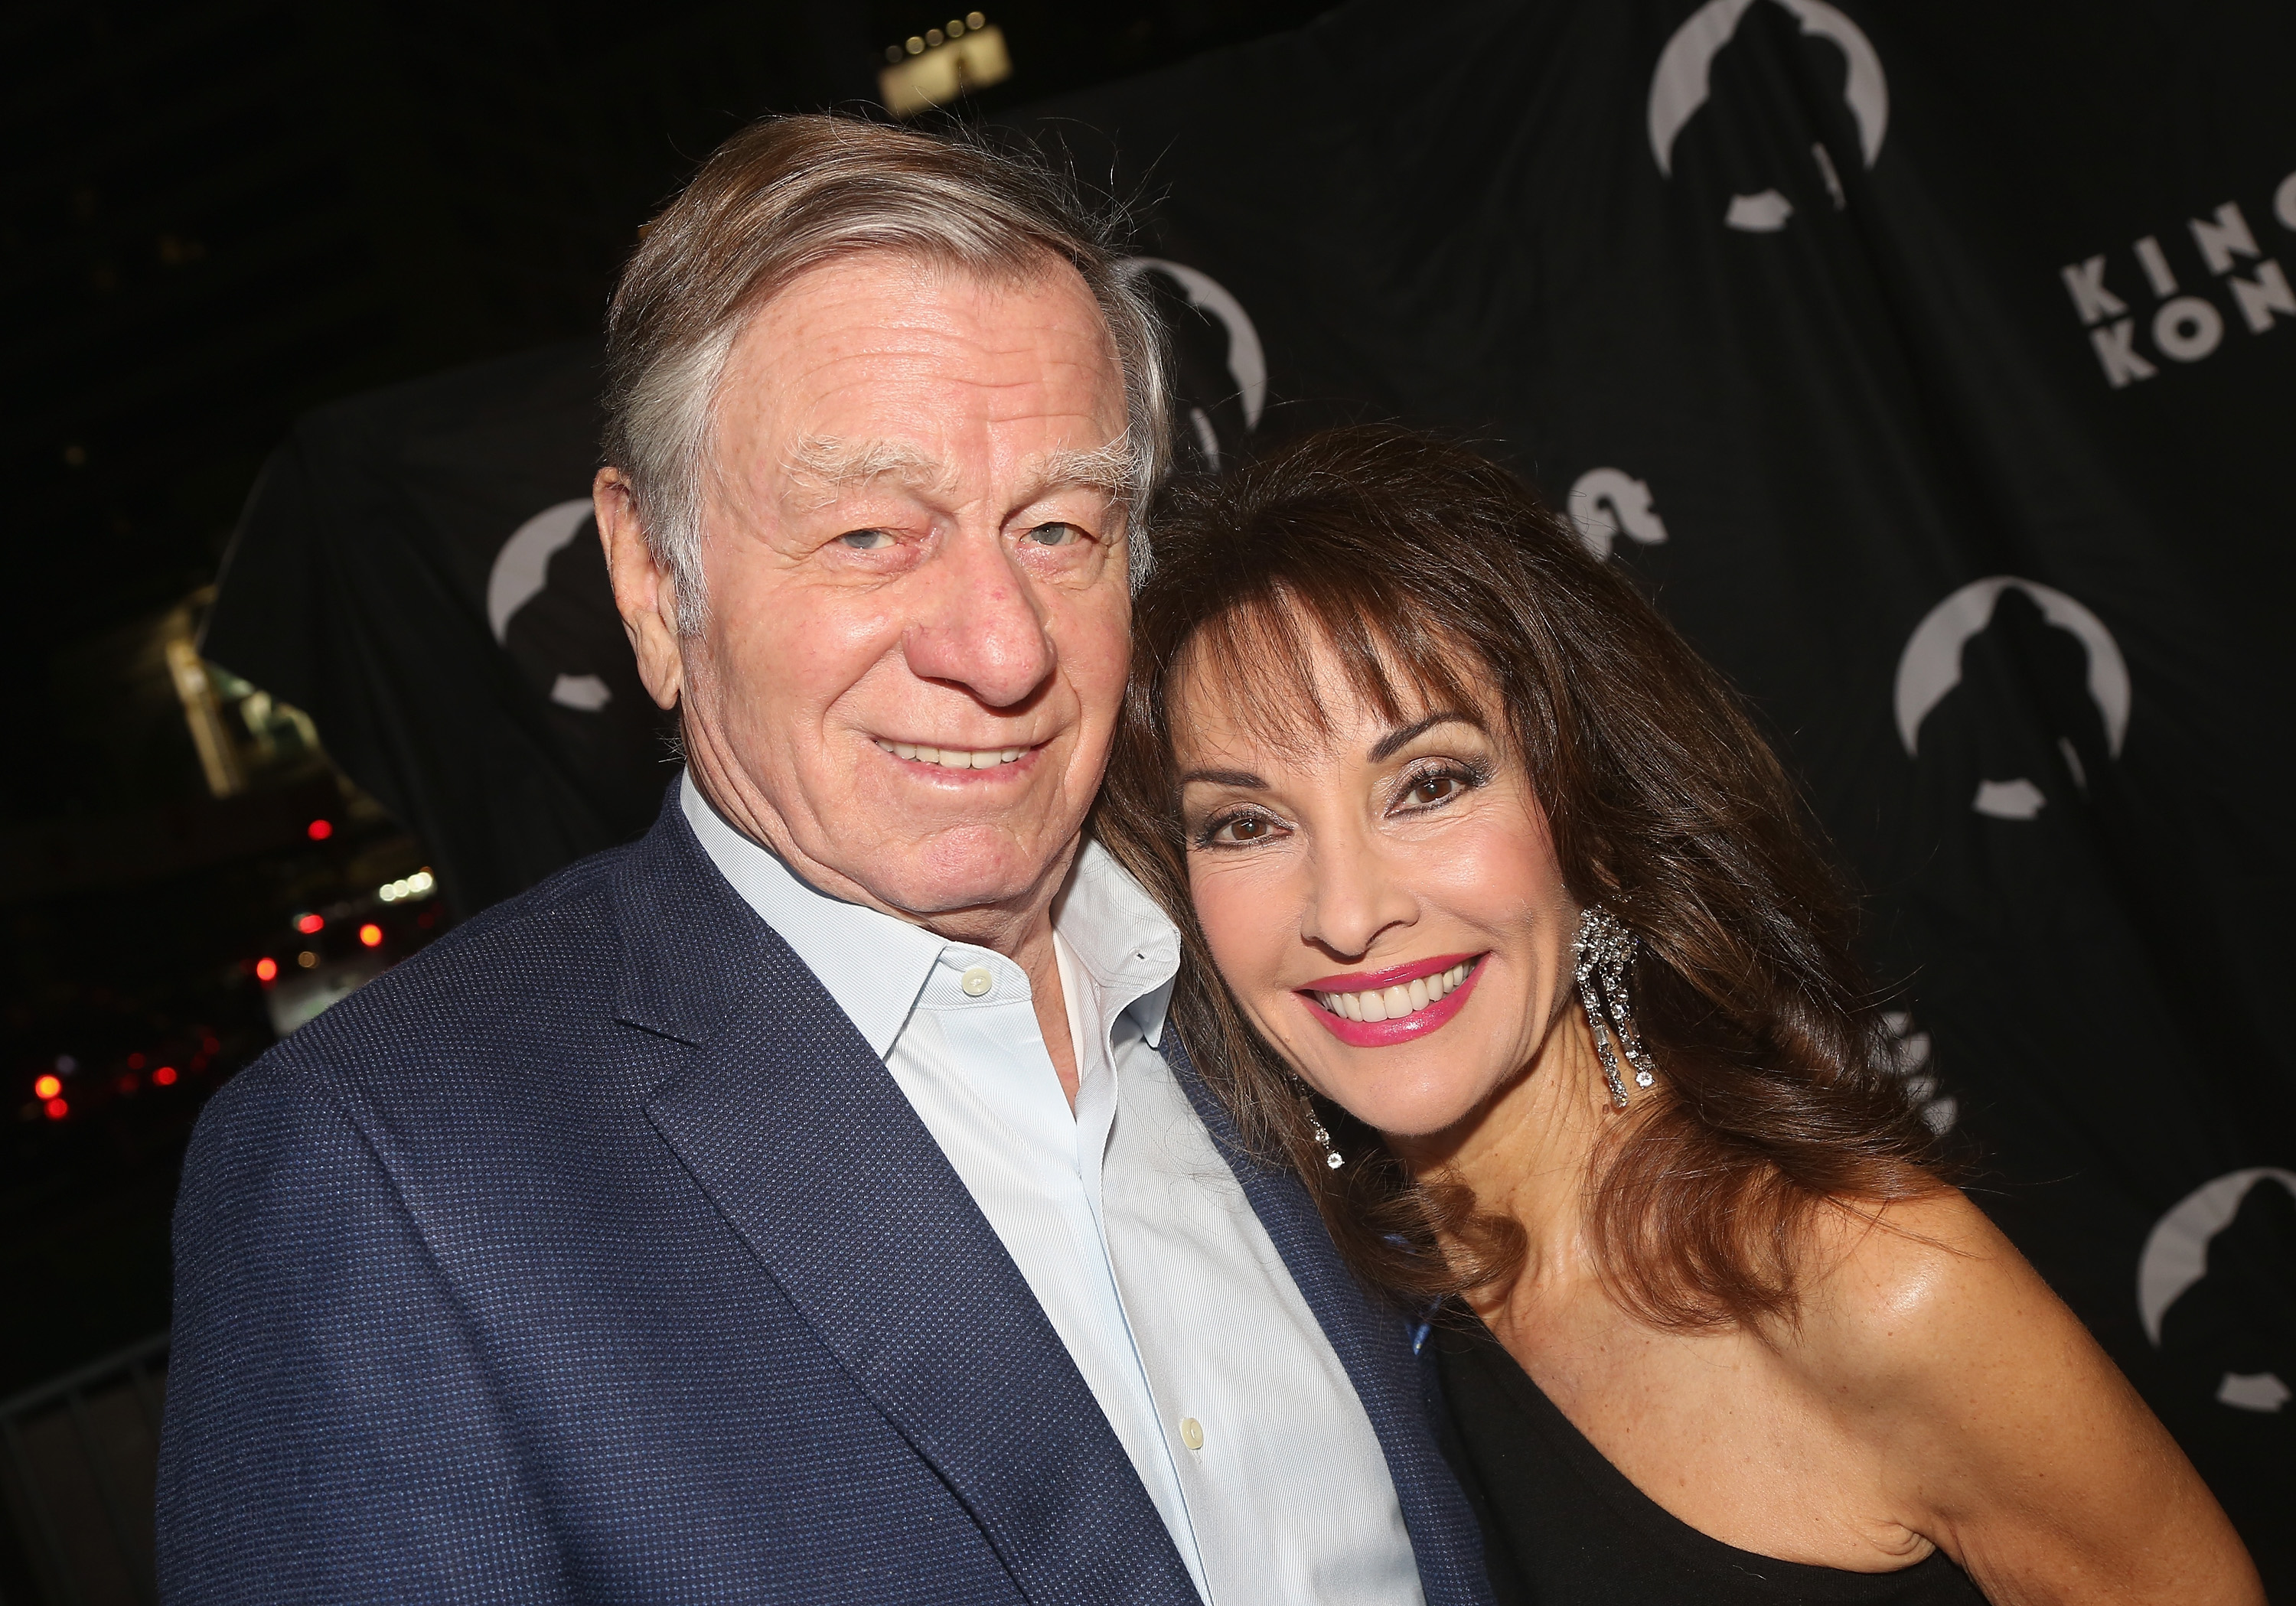 Helmut Huber and Susan Lucci at the opening night of "King Kong" on Broadway on November 8, 2018 in New York City | Source: Getty Images